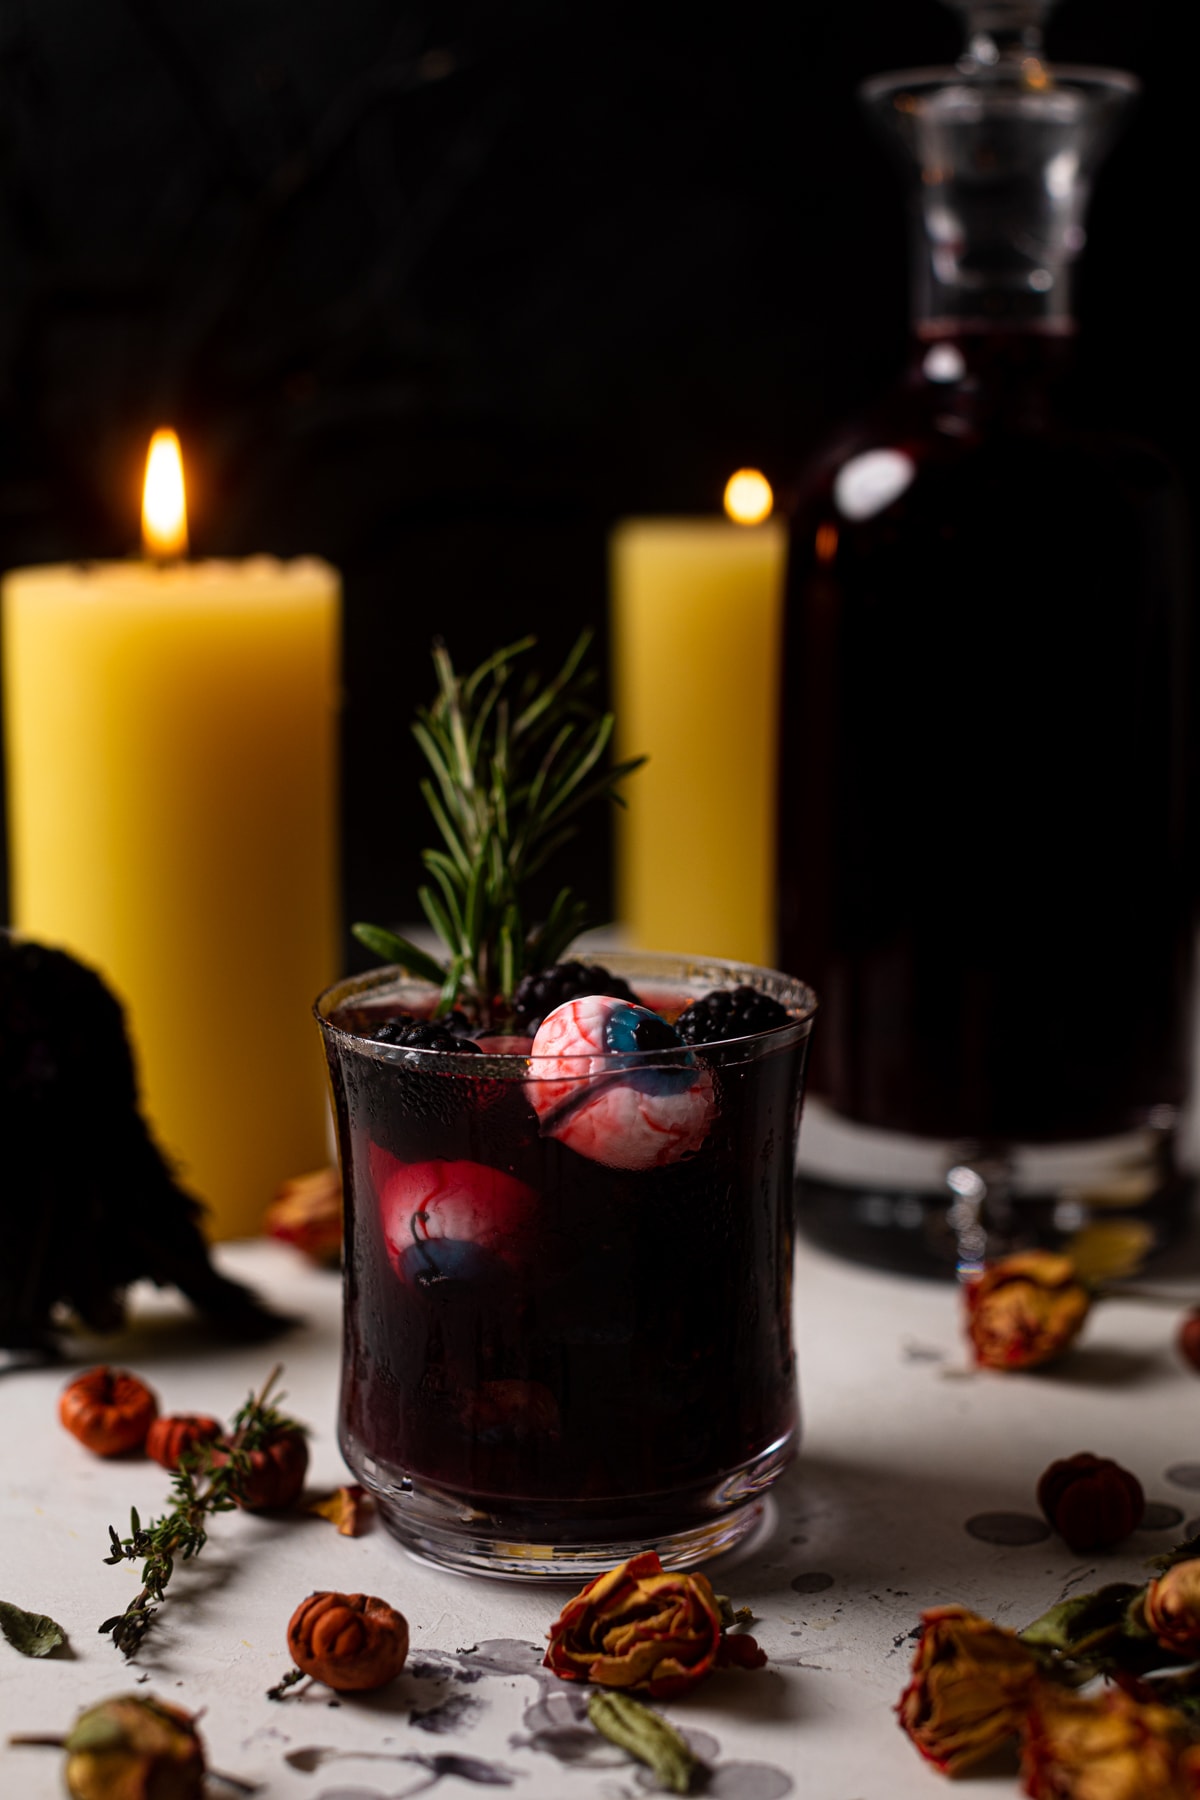 Dark Blueberry Blackberry Mocktail in a small glass in front of lit candles